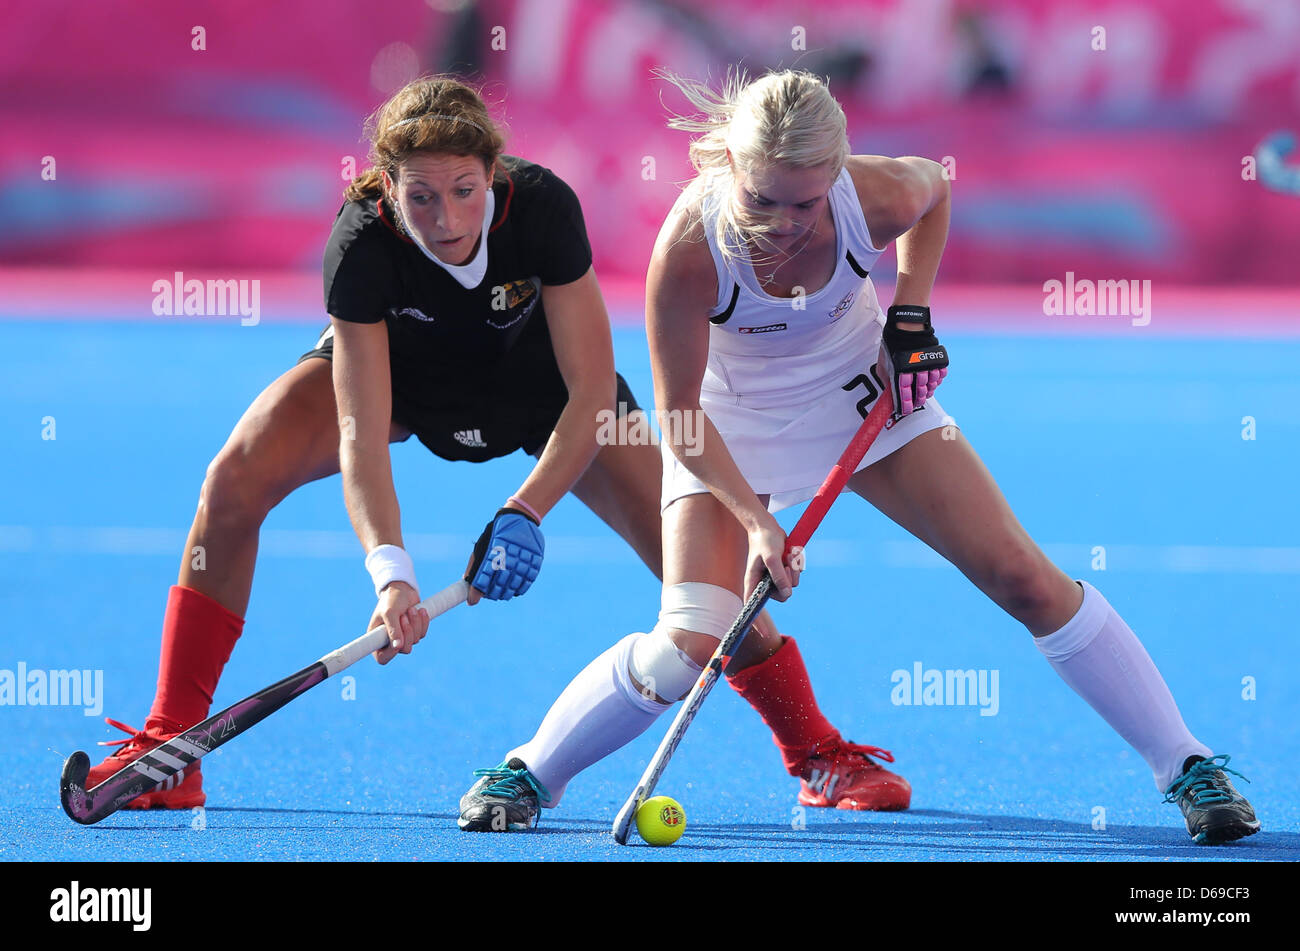 Germany's Christina Schuetze (L) vies with Samantha Harrison of New Zealand during the Women's Hockey Preliminary Round Group B match New Zealand vs Germany during the London 2012 Olympic Games Hockey tournament in the Riverside Arena in London, Great Britain, 06 August 2012. Photo: Christian Charisius dpa  +++(c) dpa - Bildfunk+++ Stock Photo